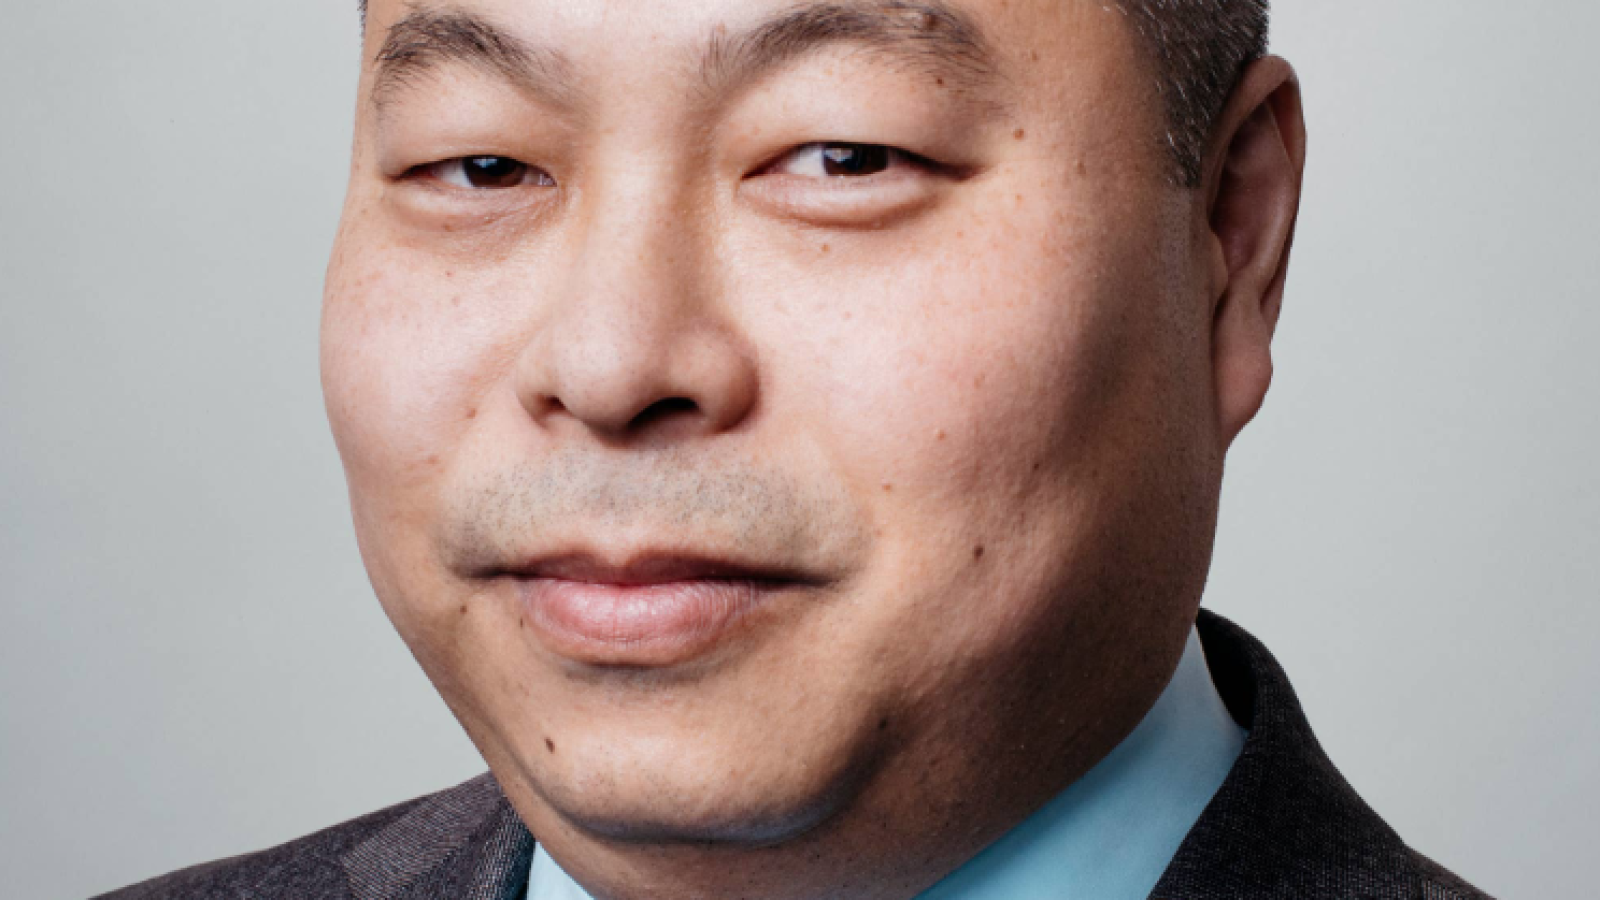 Ted Kim, wearing suit, looking at camera.